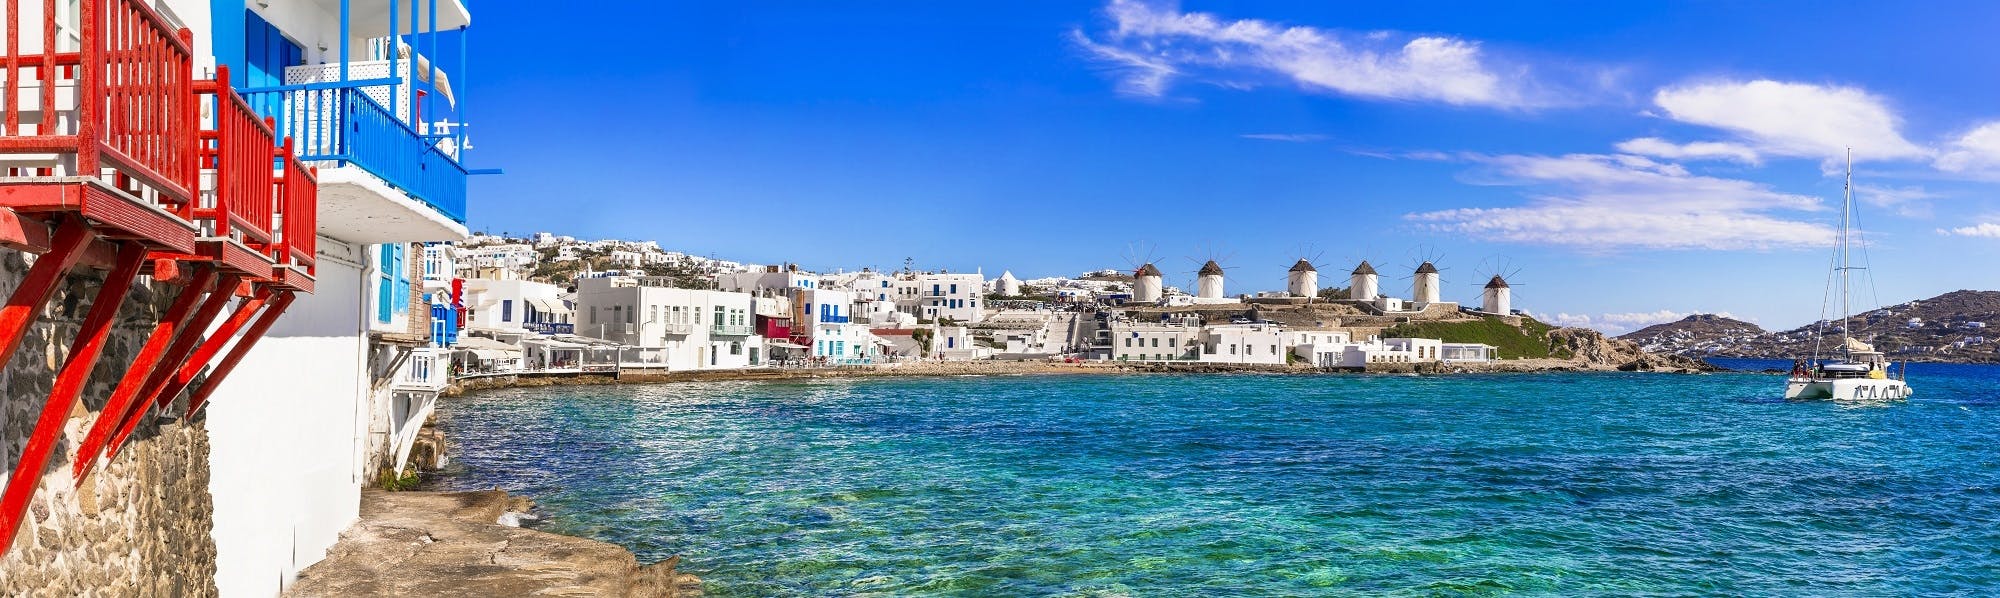 Full day sightseeing tour to Mykonos from Athens